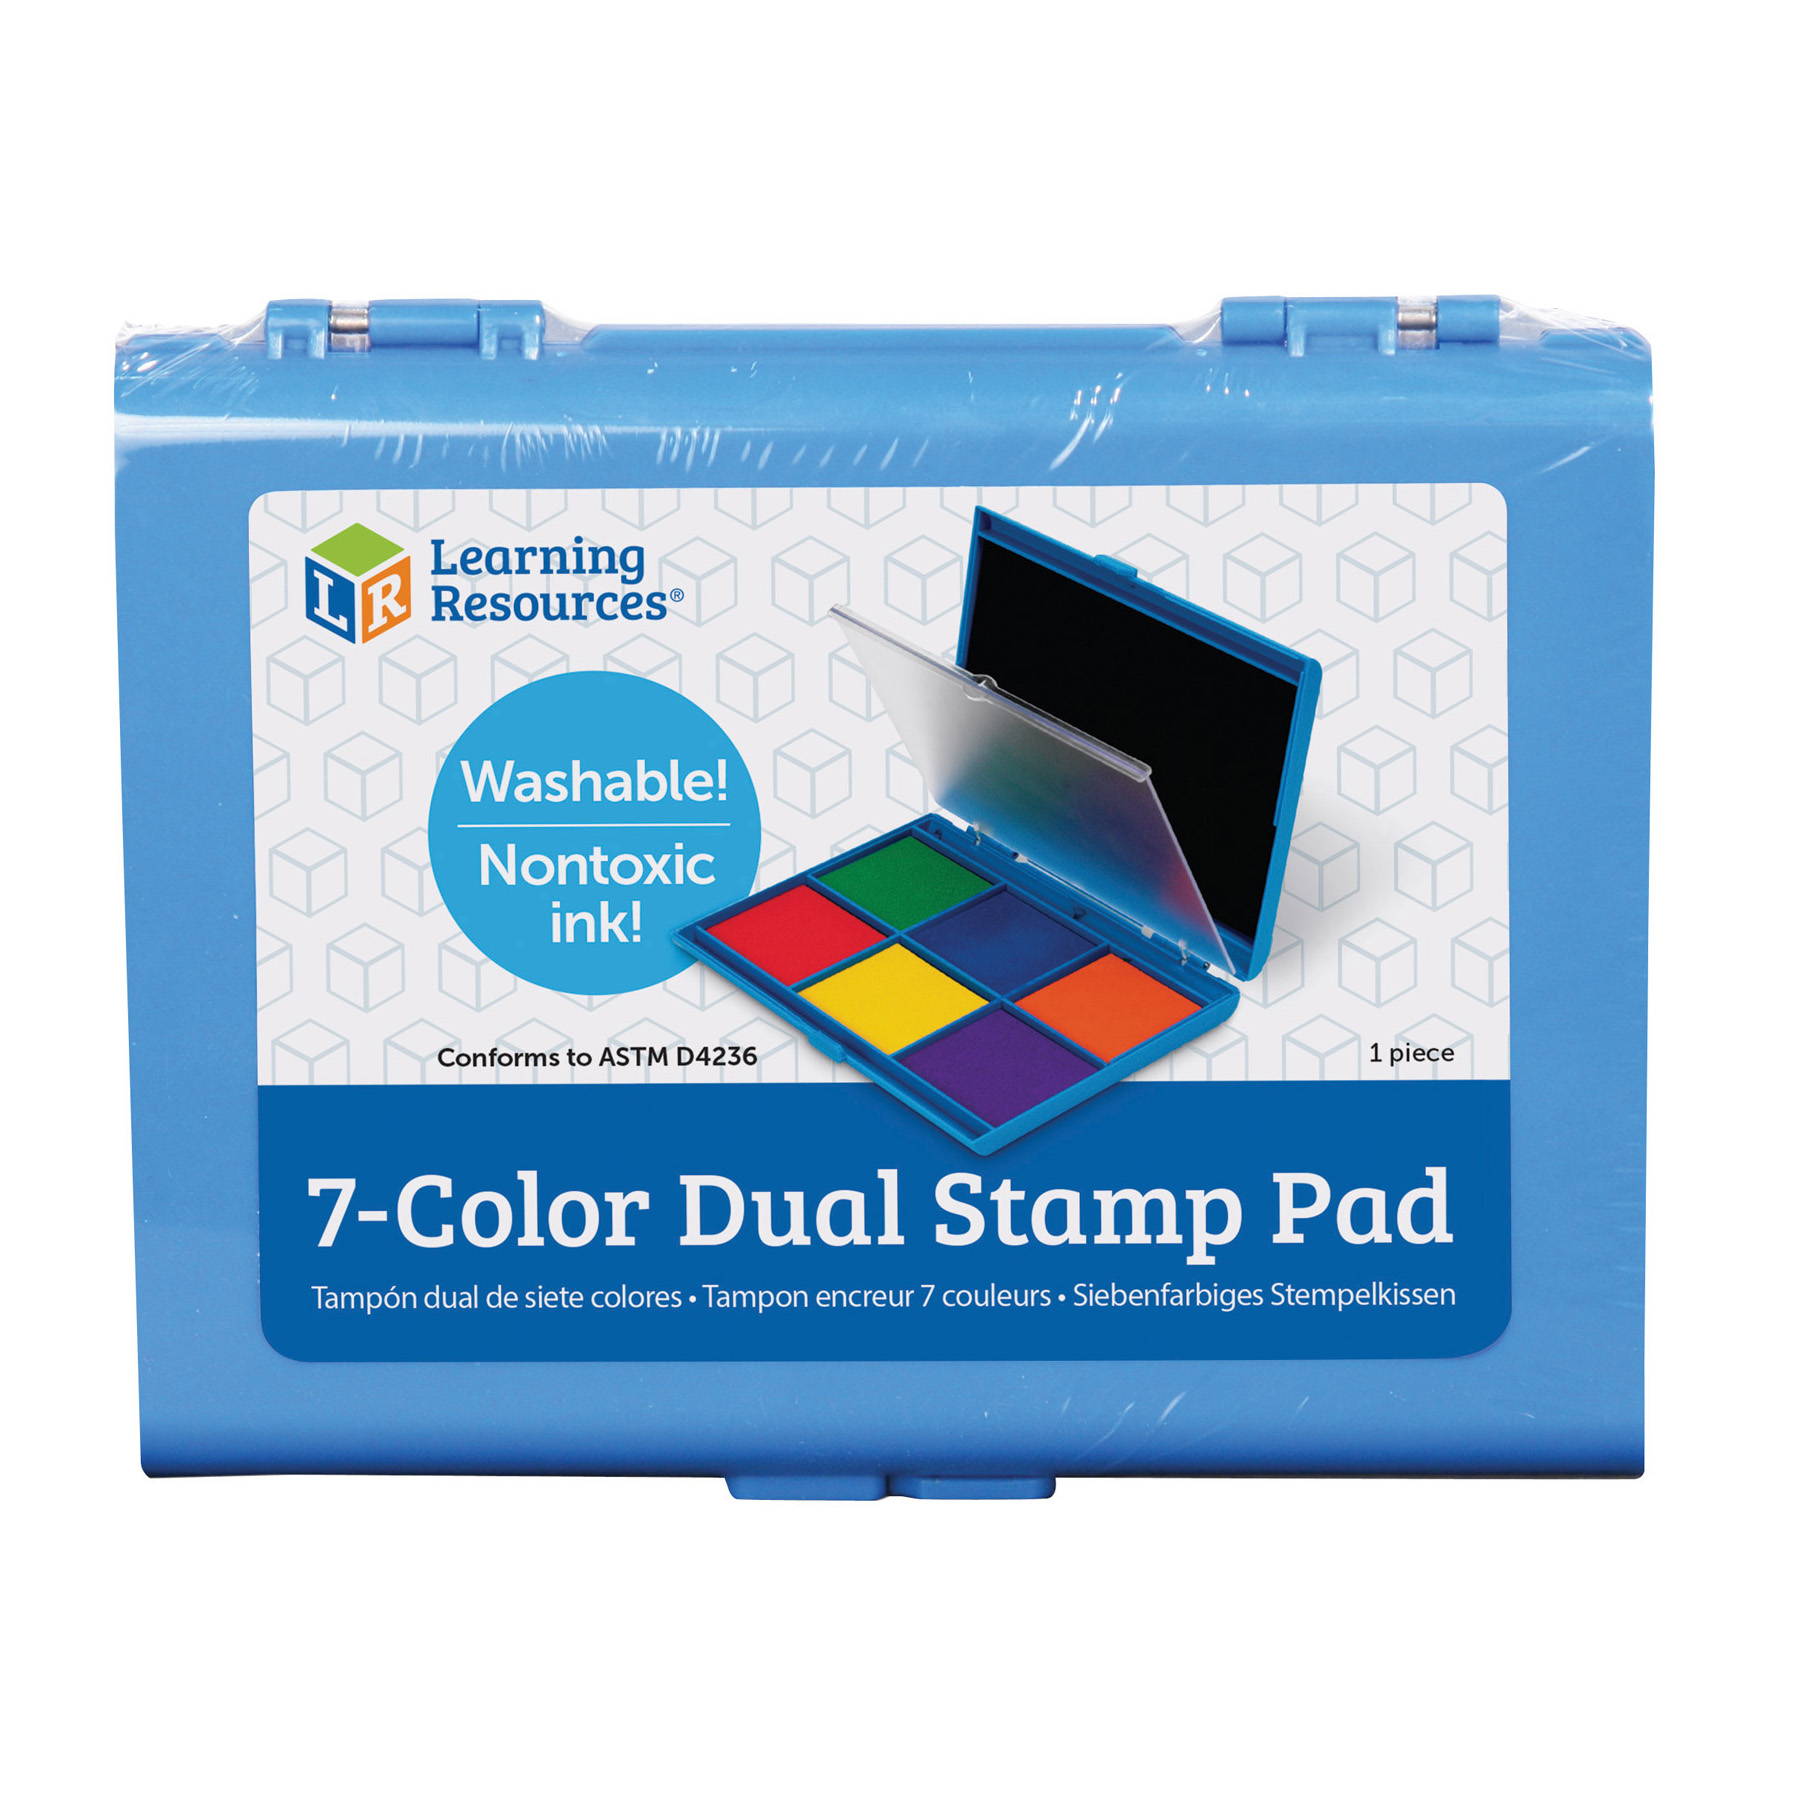 The Teachers' Lounge®  7-Color Dual Stamp Pad